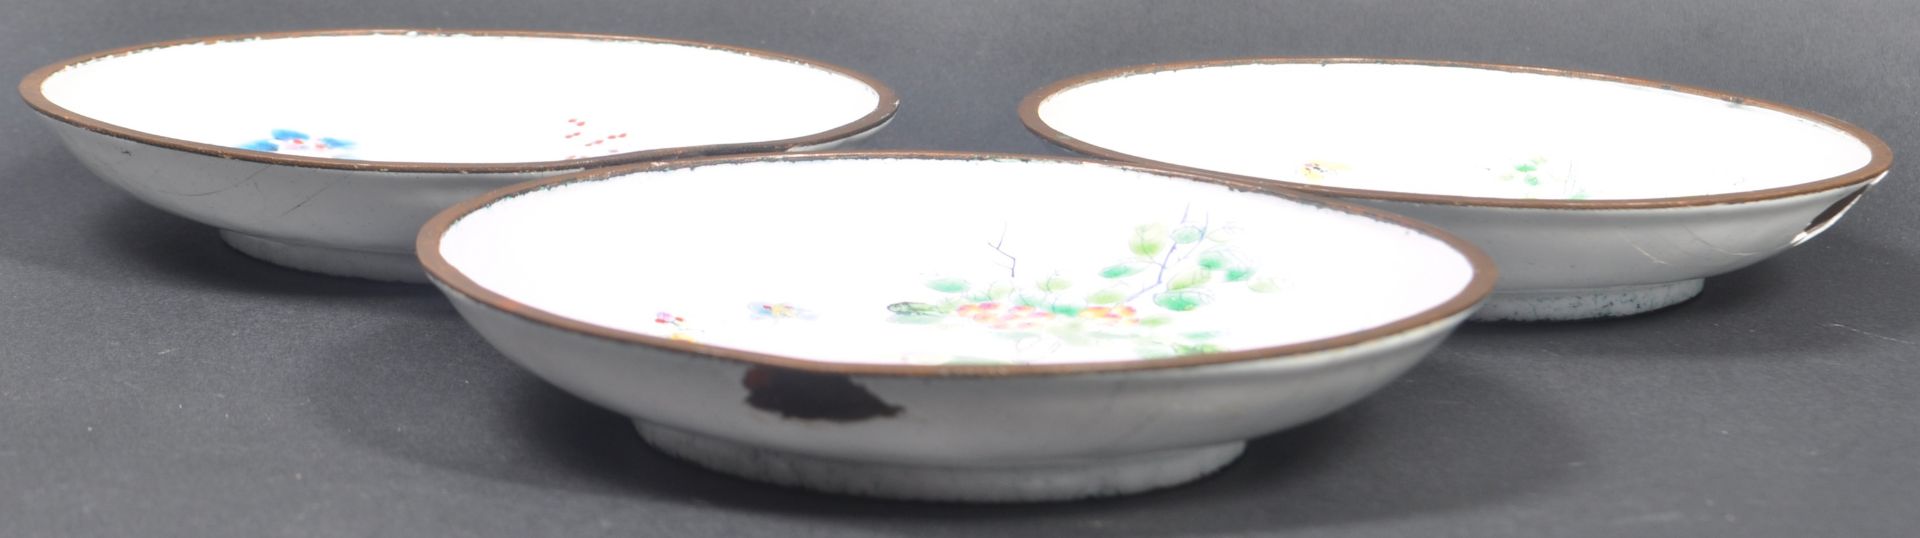 THREE 1920'S CHINESE ENAMELED COPPER DISHES - Image 5 of 7